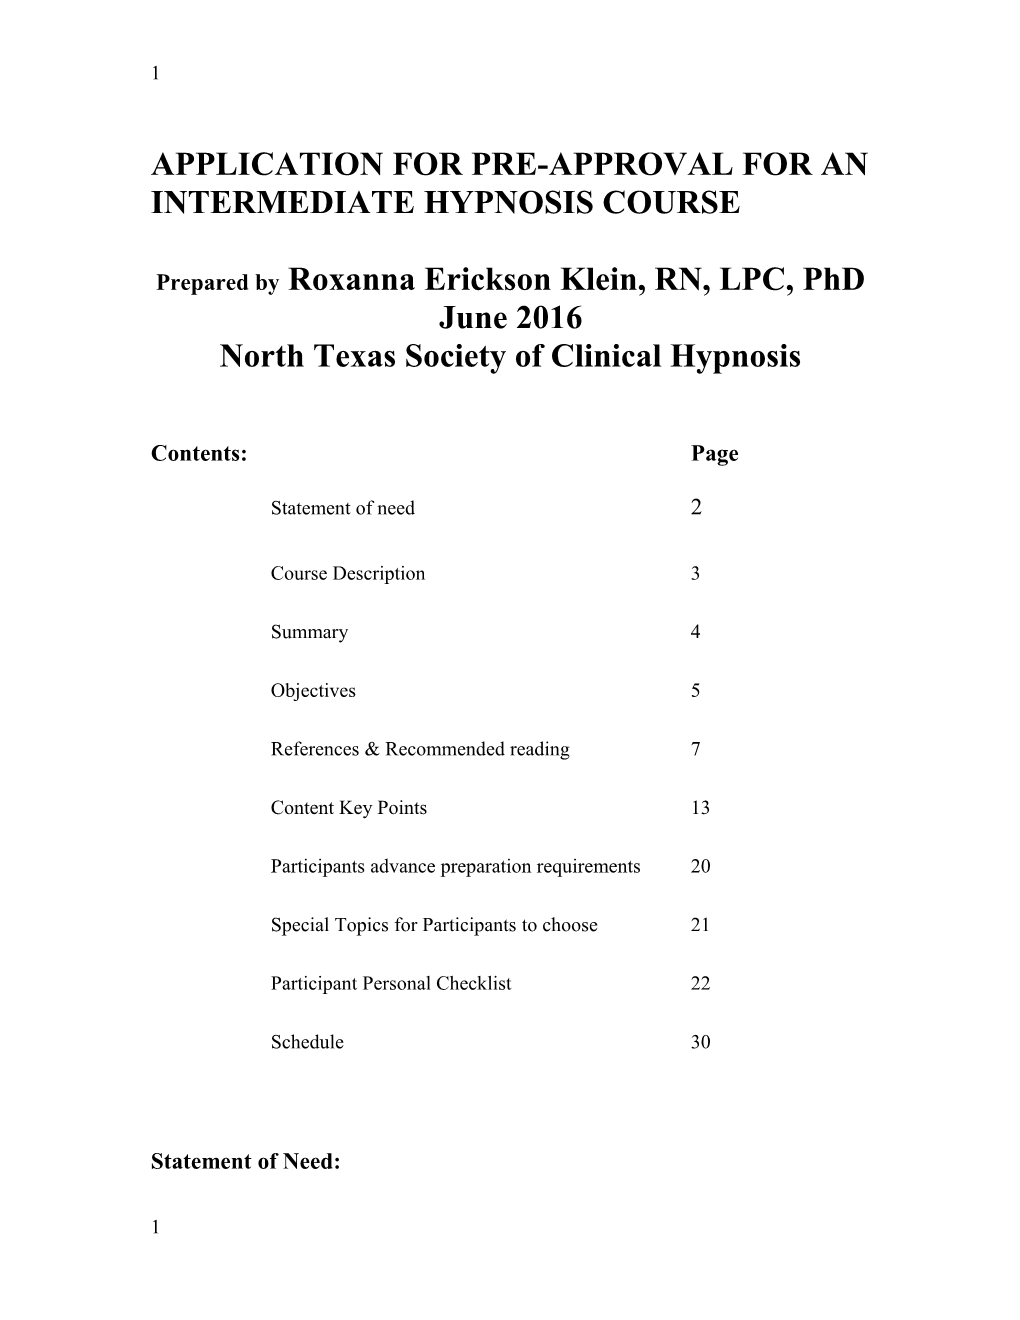 Application for Pre-Approval for an Intermediate Hypnosis Course